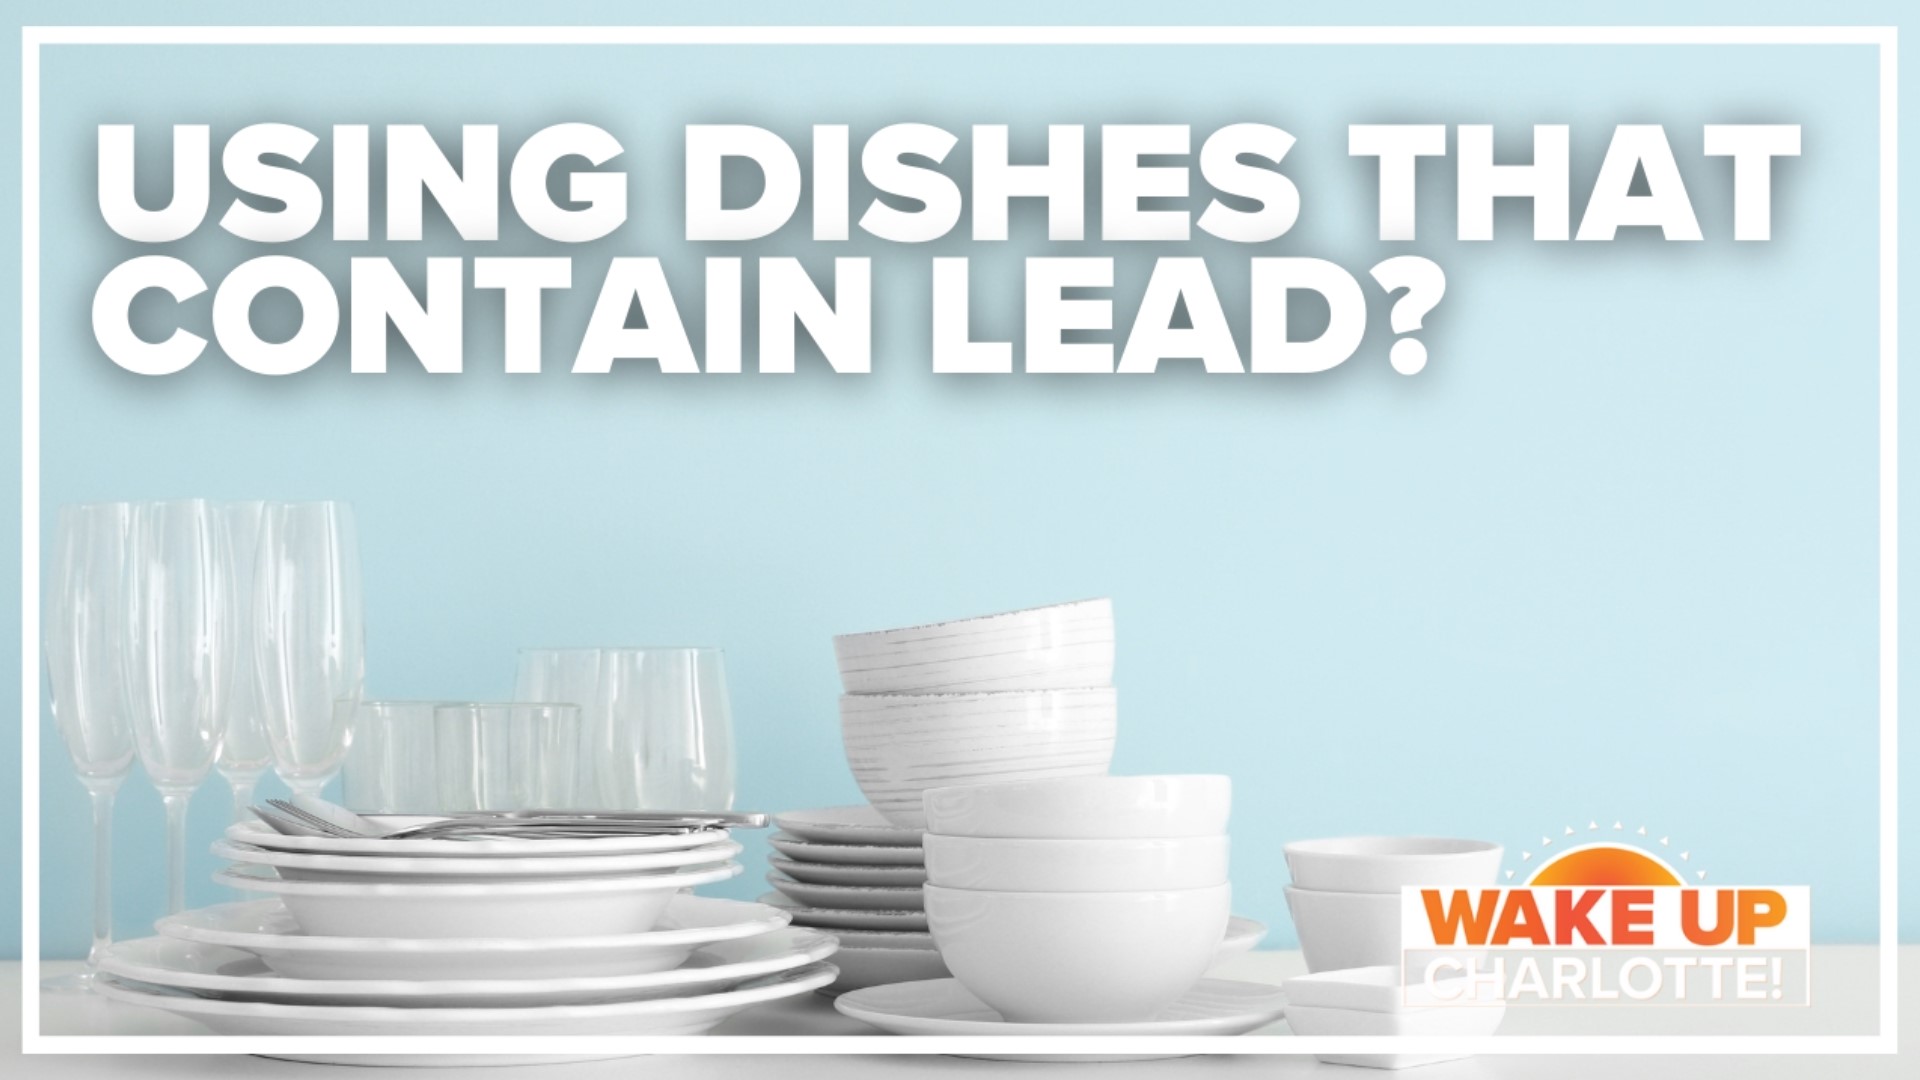 We were recently asked by a viewer if they should stop using "food dishes" that may have lead.